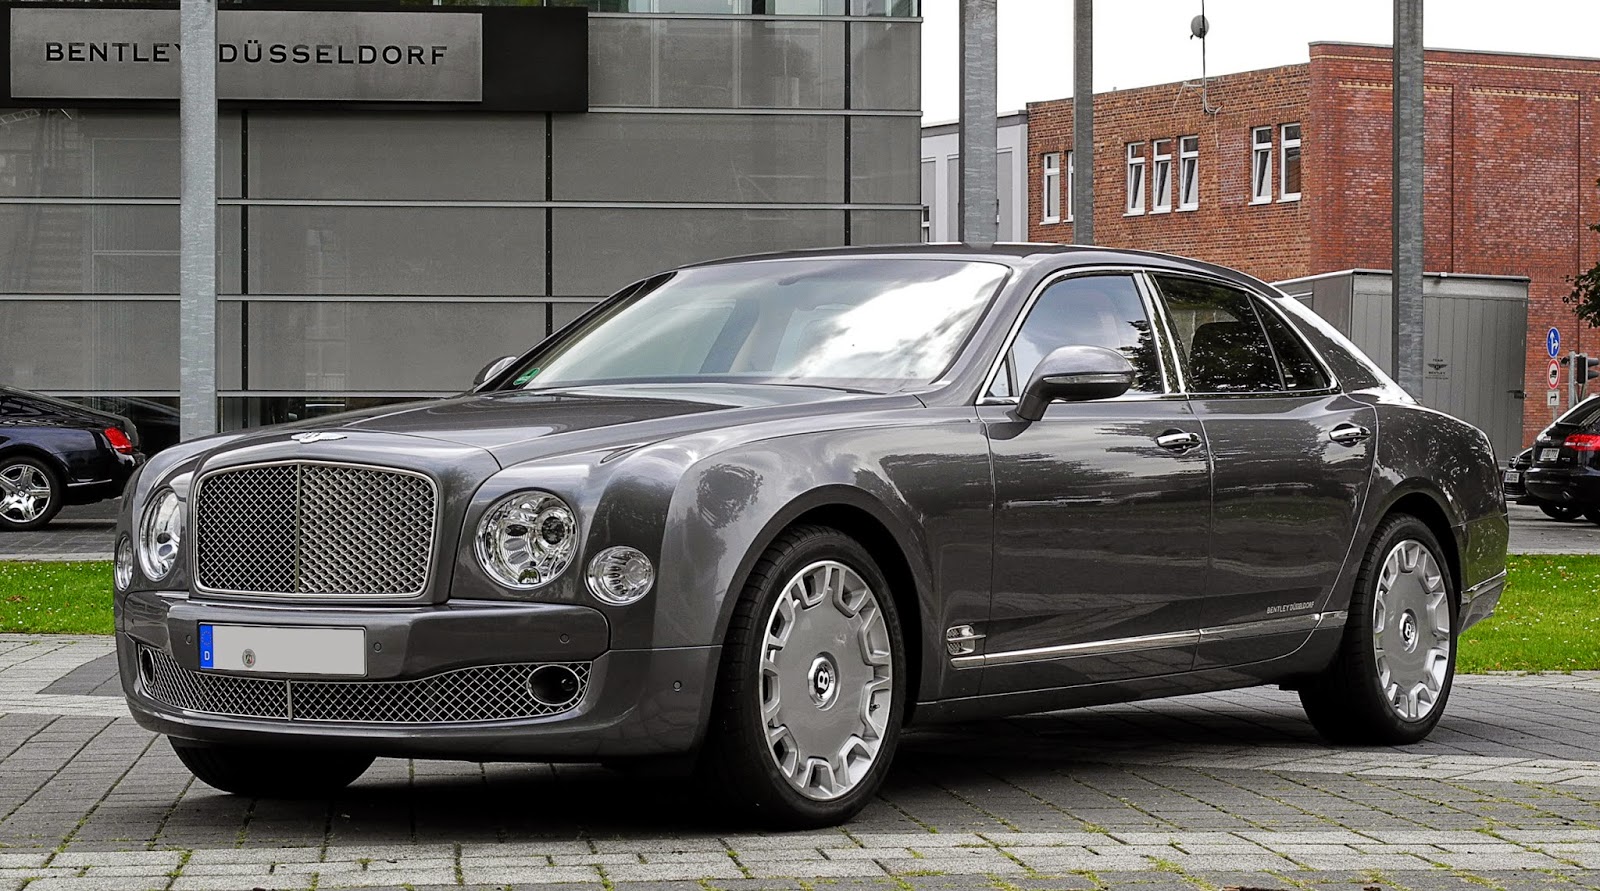 What is the most expensive bentley